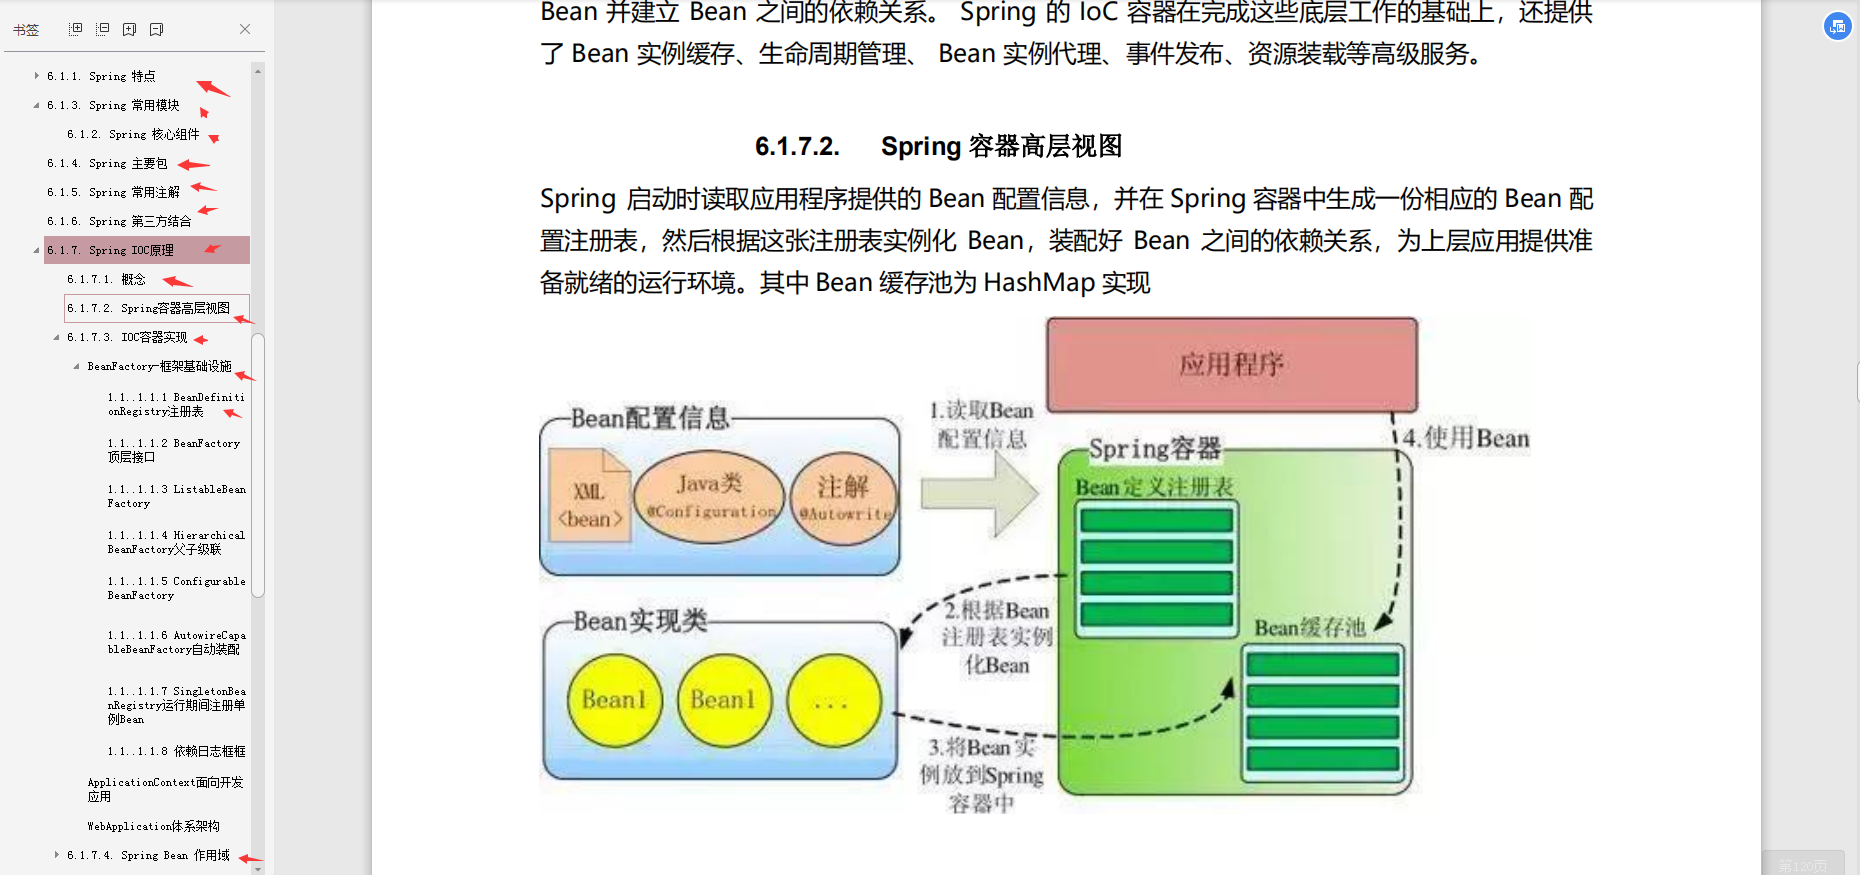 Ant Financial is a bit "ruthless" and forced me to thoroughly understand the Spring source code (with study notes)